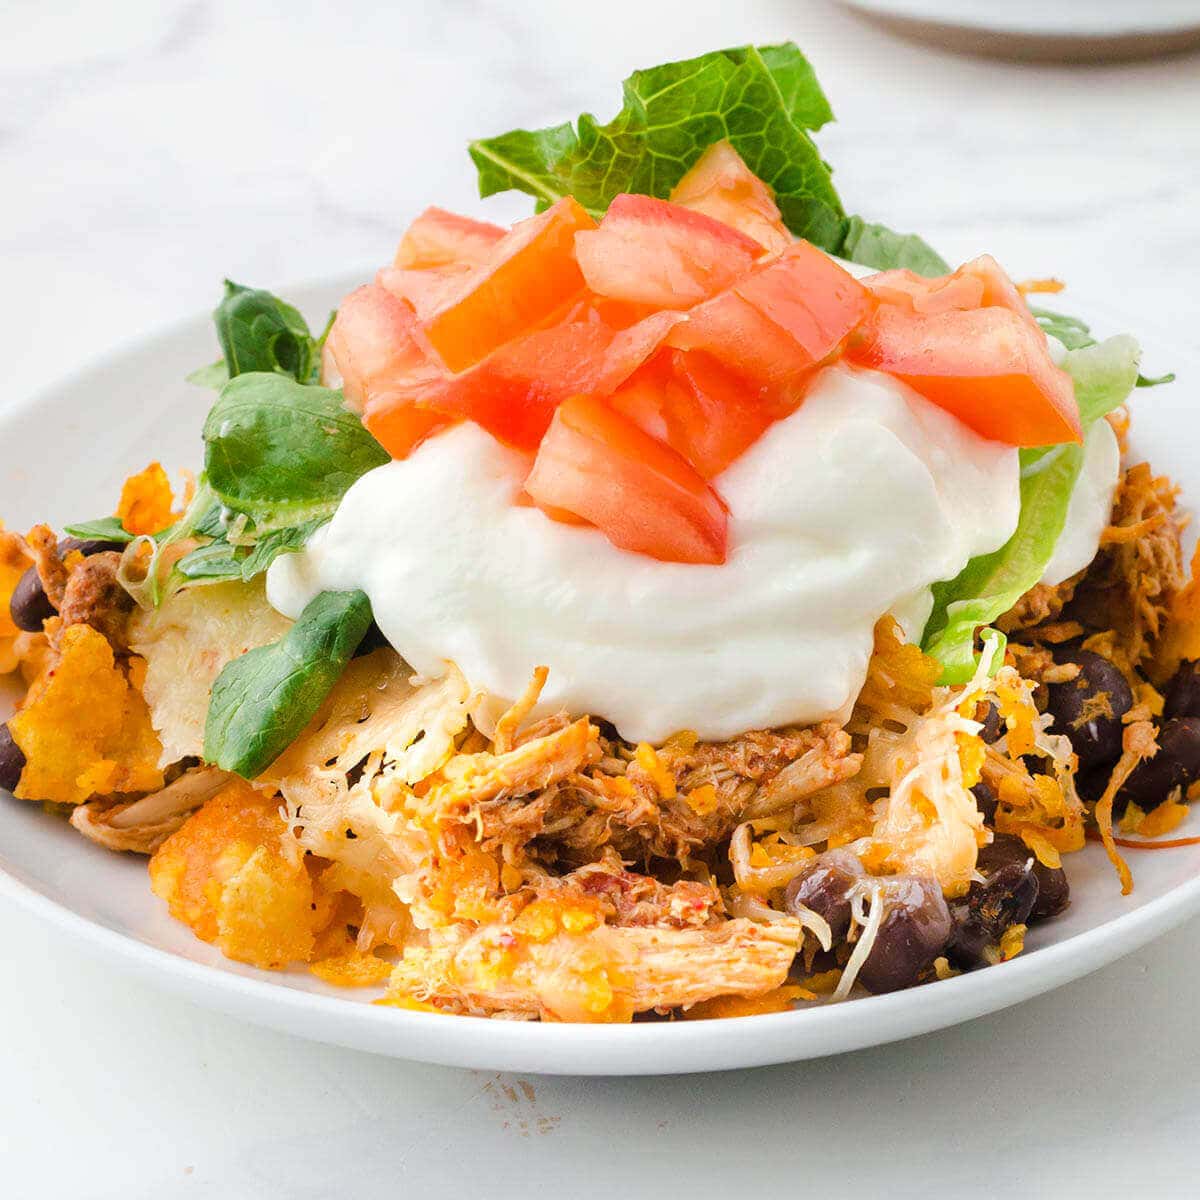 Loaded Tex Mex Chicken dish on plate.